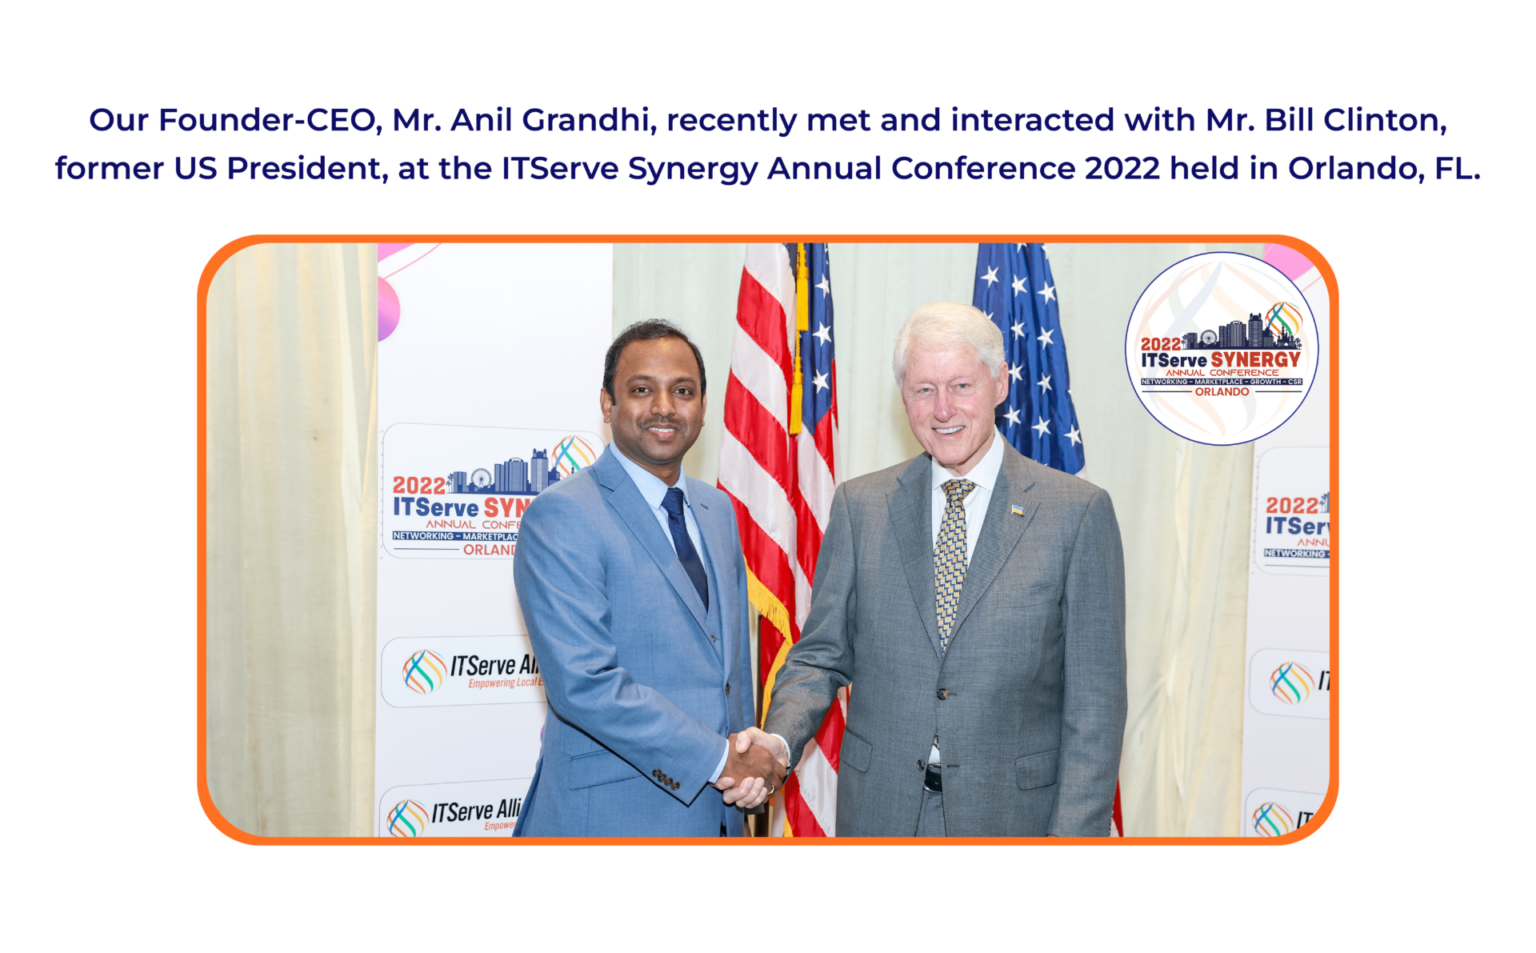 Anil Grandhi with Mr. Bill Clinton, former US President, at the ITServe Synergy Annual Conference 2022